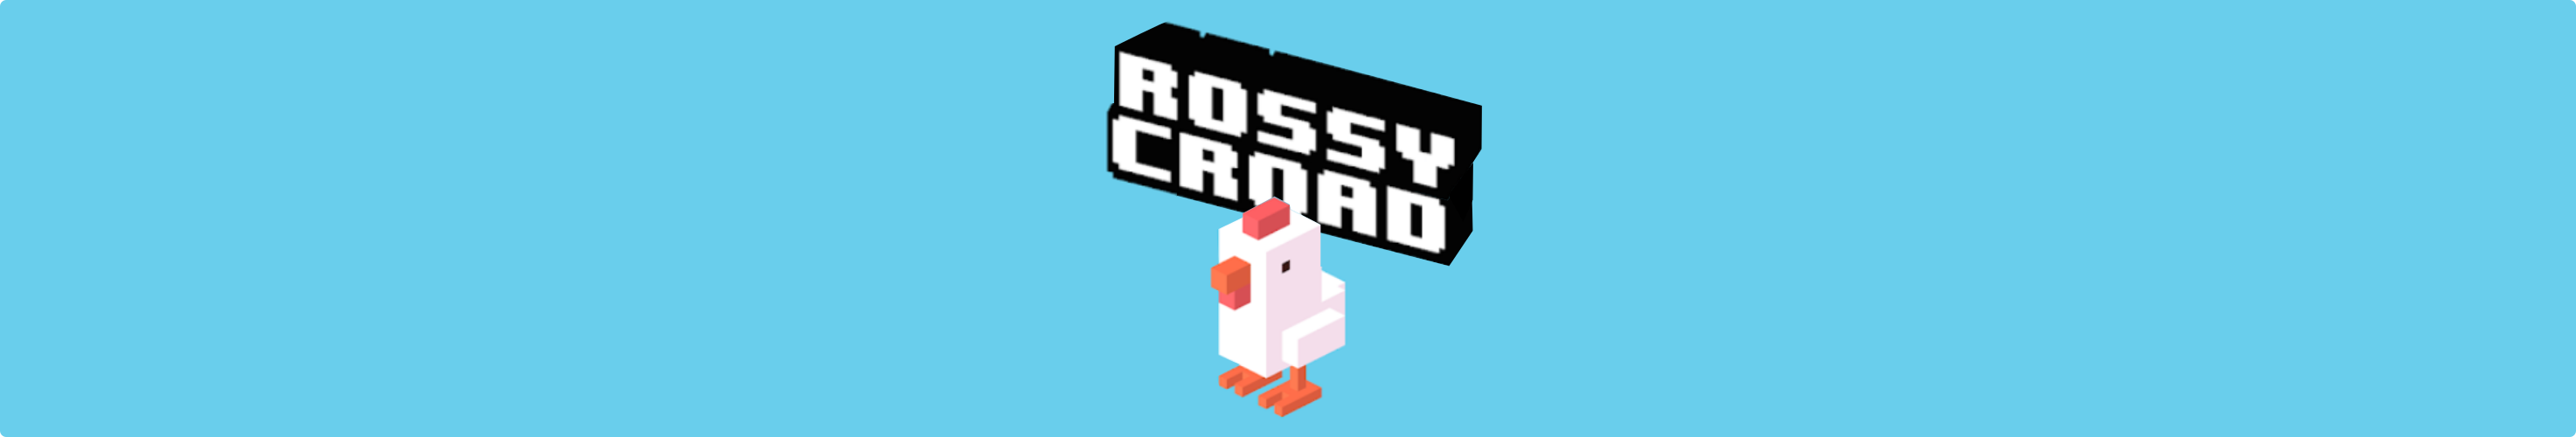 ROSSY CROAD